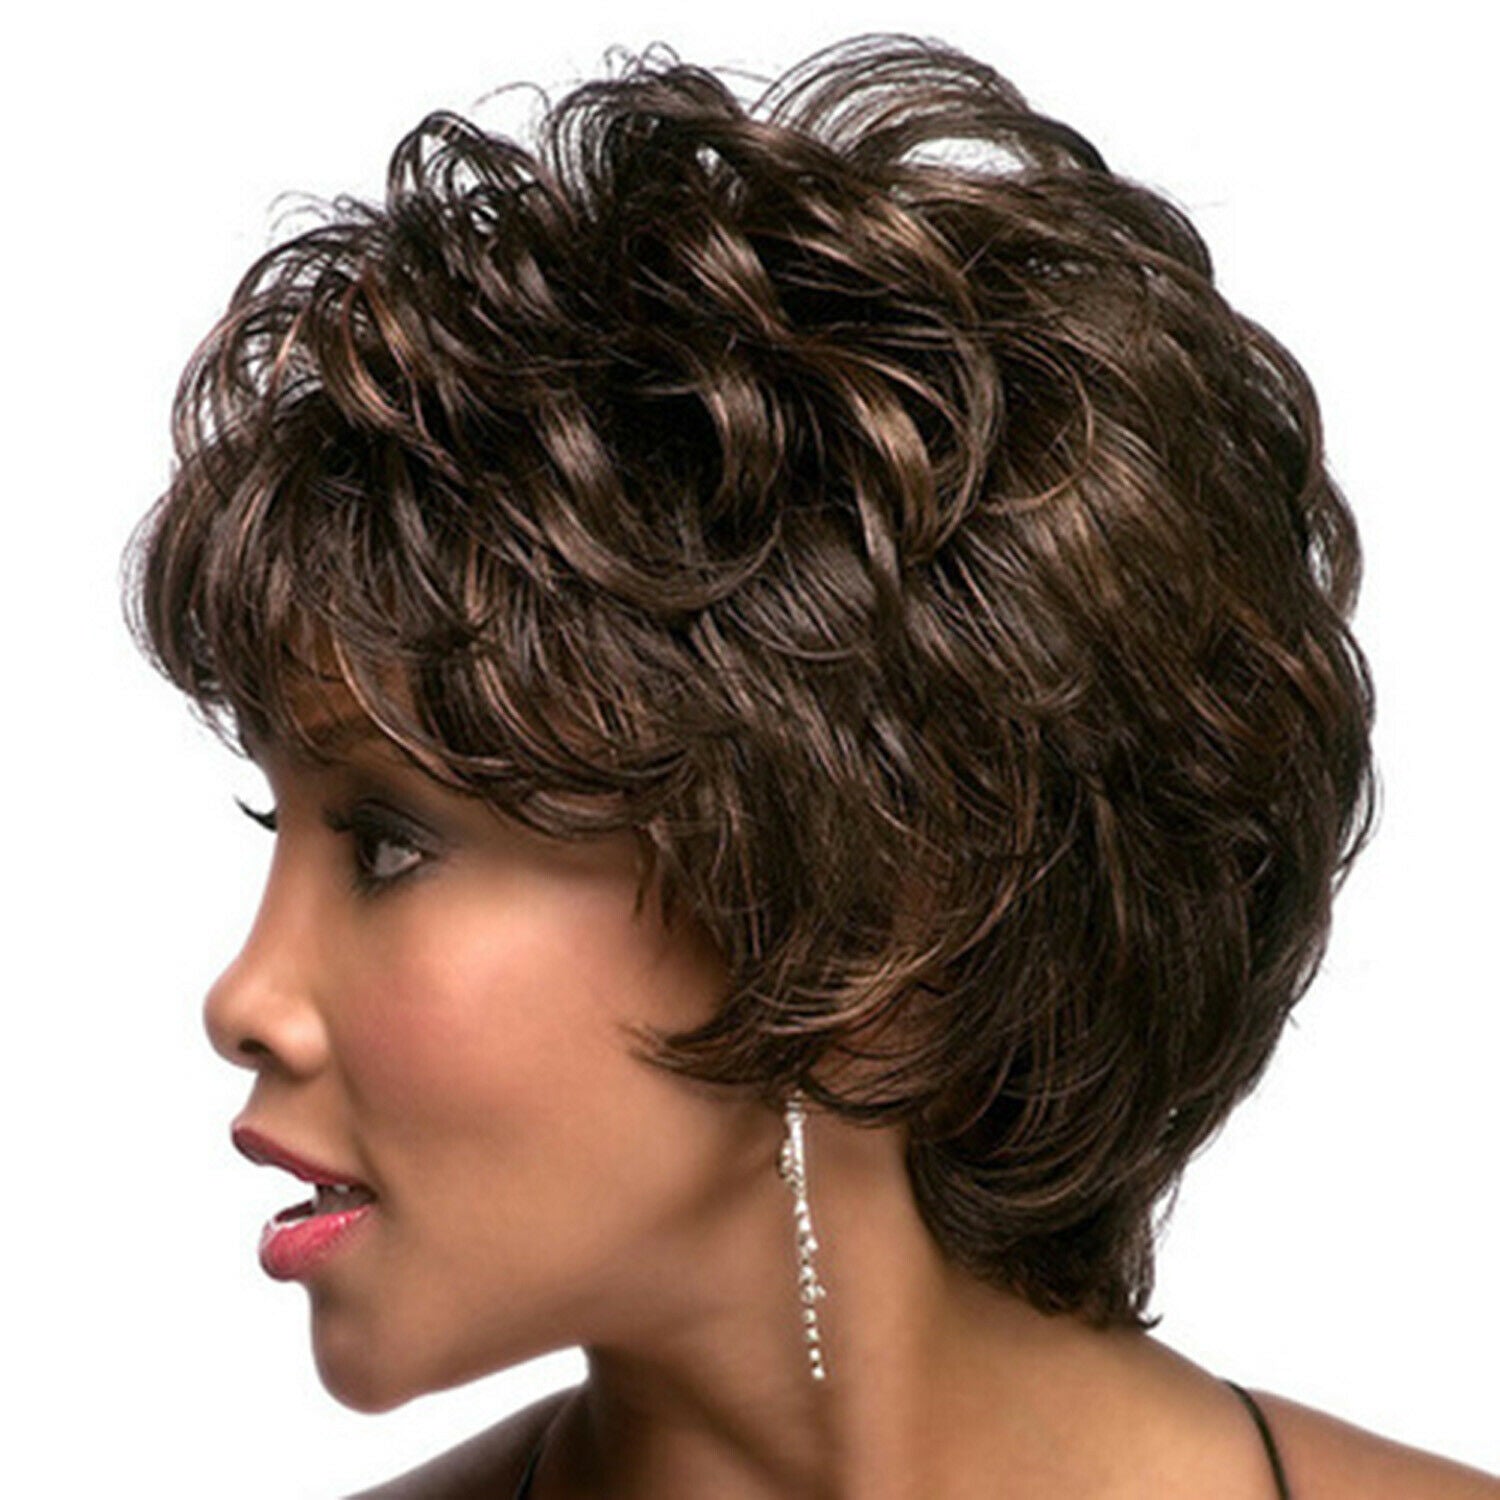 Short Curly Hair With Air Bangs And Fluffy For Women Parties Black Brown Mixed